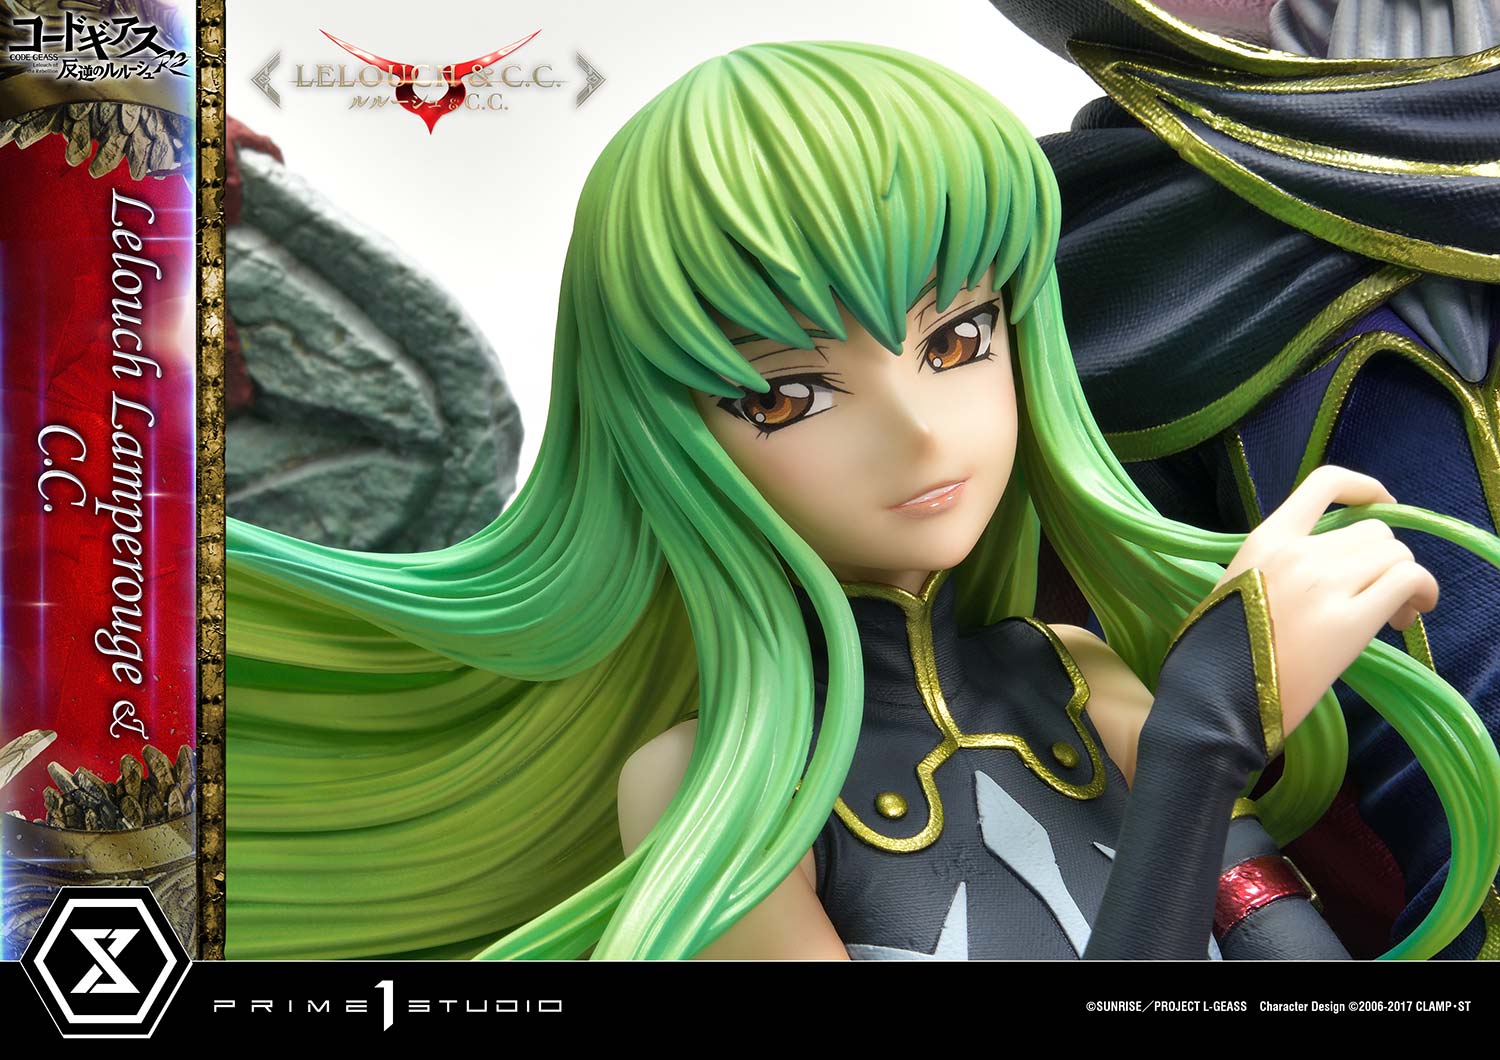 Code Geass Lelouch of the Rebellion R2 - Icon 4 by Elios96 on